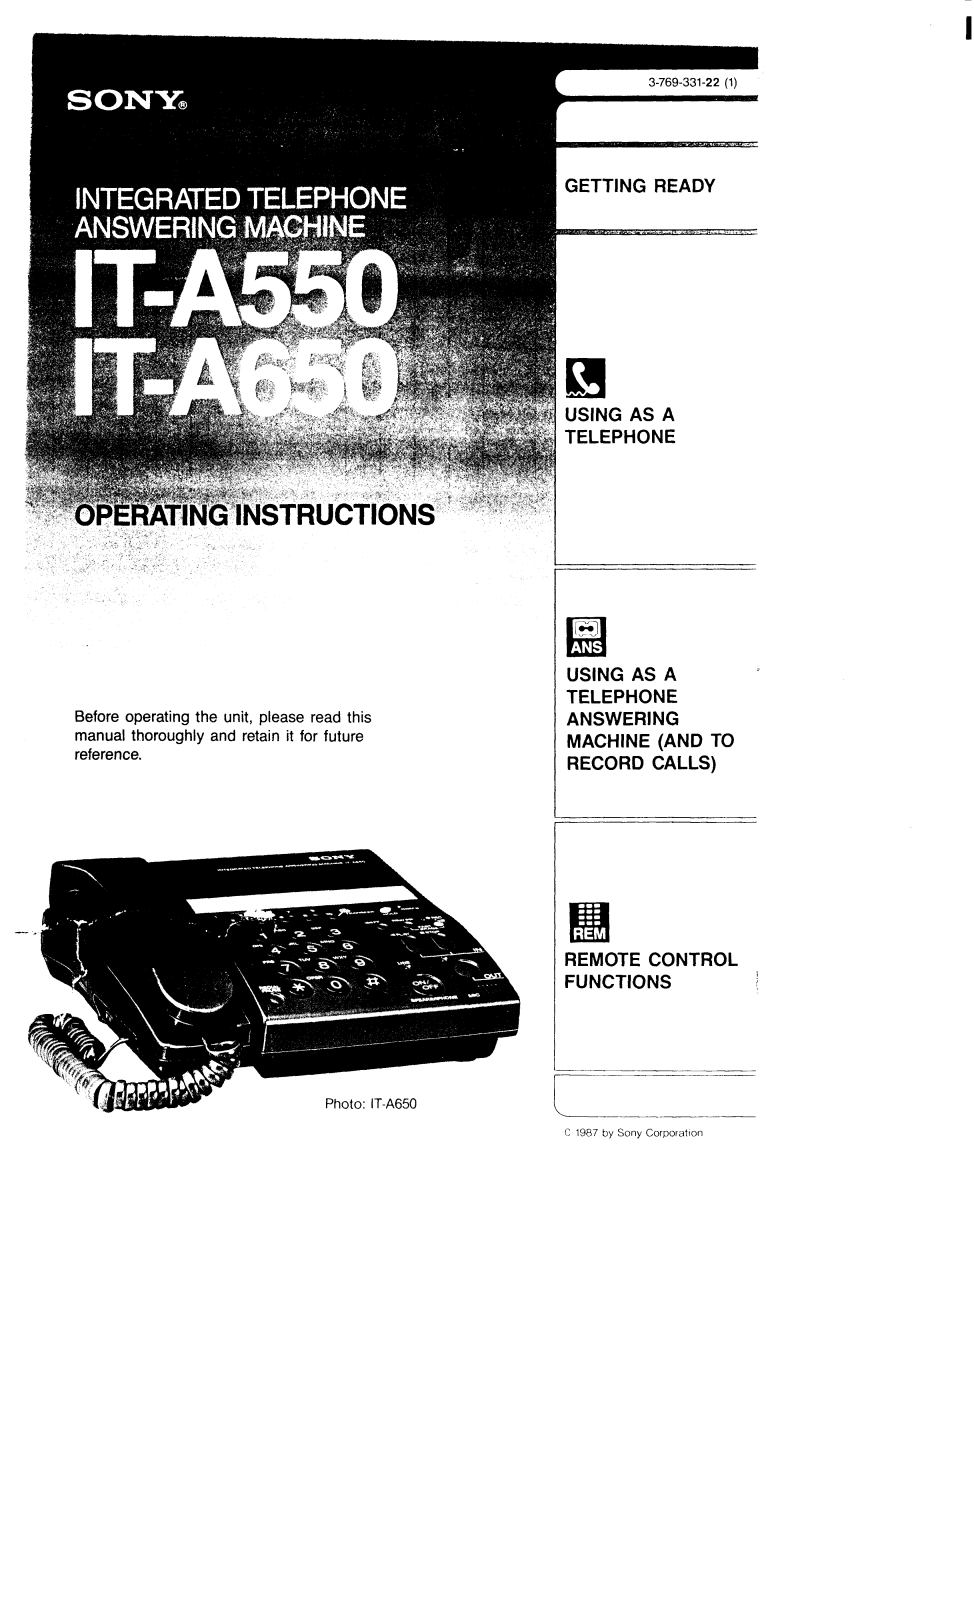 Sony IT-A550, IT-A650 Operating Instructions